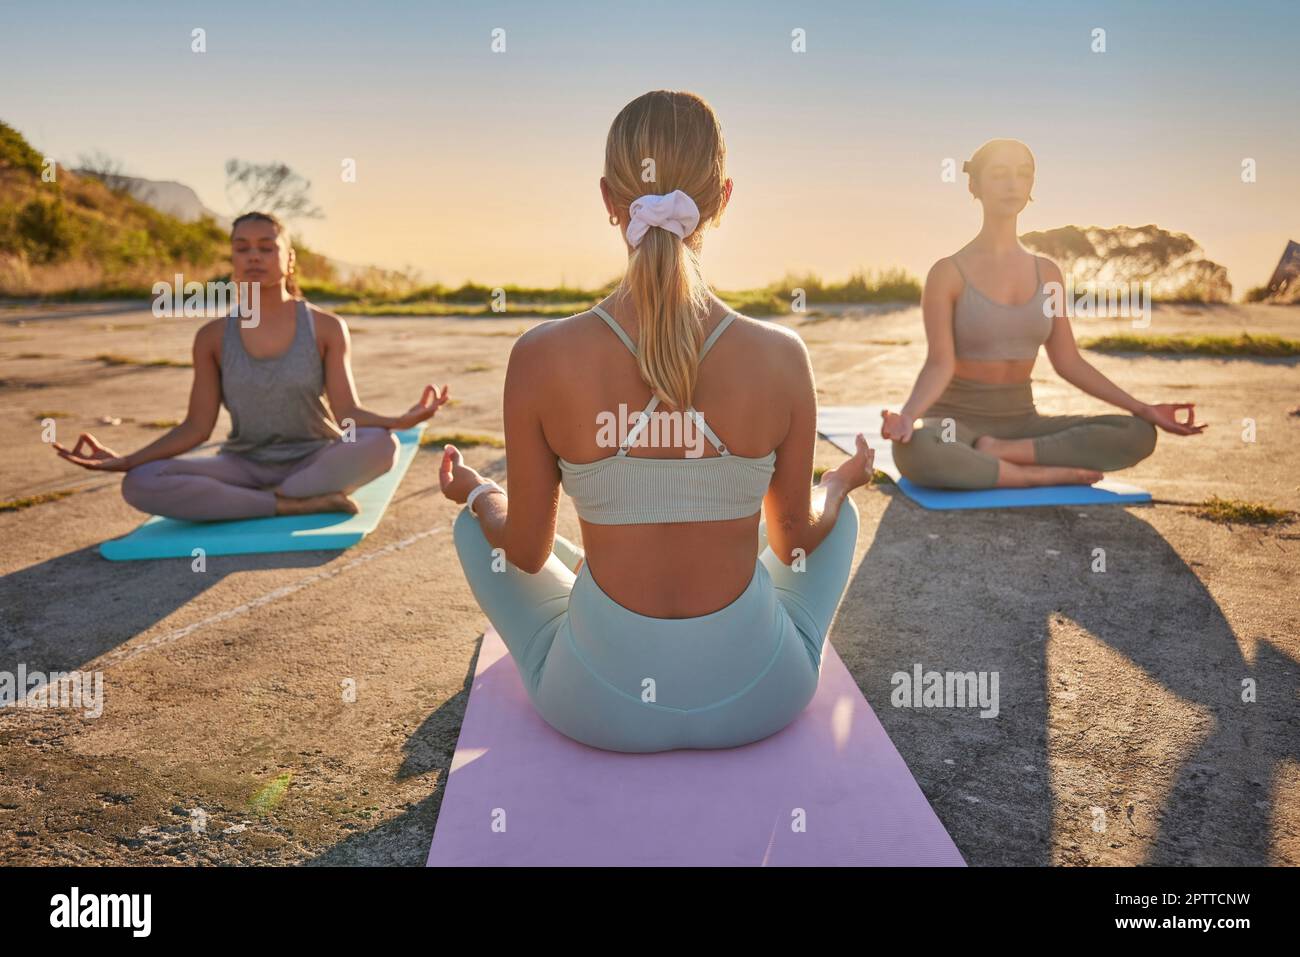 Full length yoga women meditating with legs crossed for outdoor practice in remote nature. Diverse group of mindful active friends bonding and balanci Stock Photo